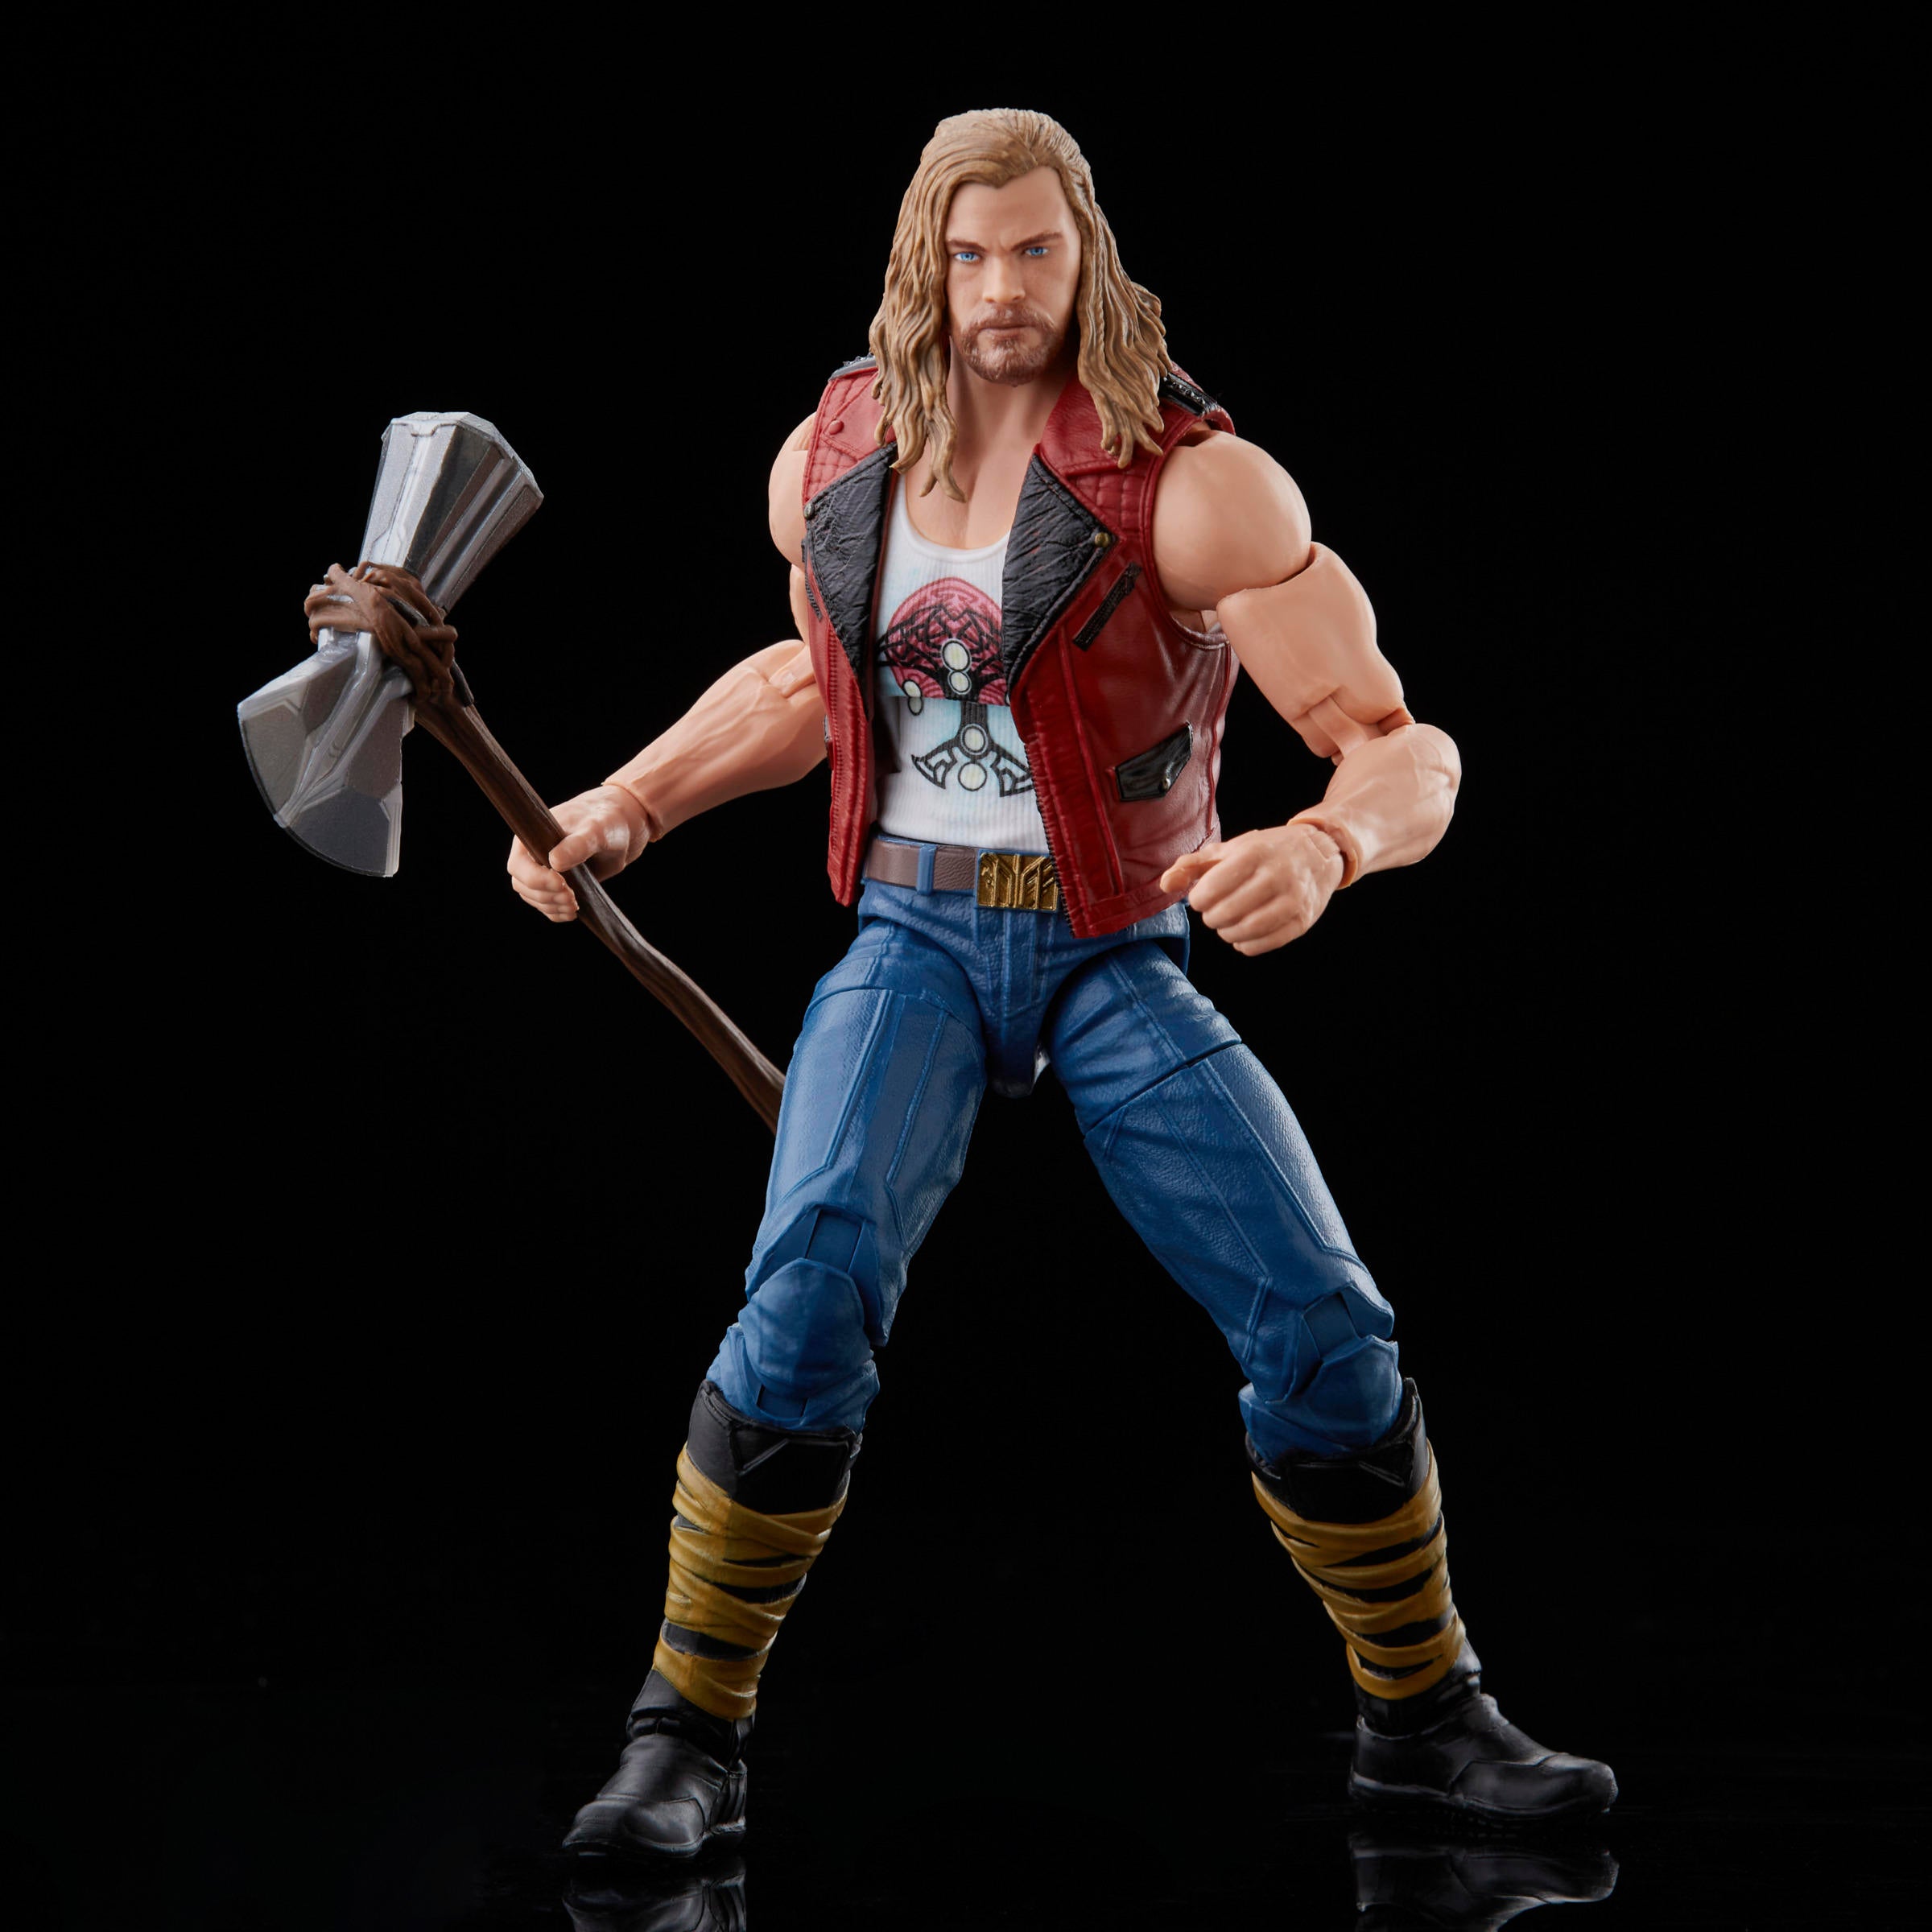 REVIEW: Thor Love and Thunder Marvel Legends Star-Lord Figure (Korg Series)  - Marvel Toy News